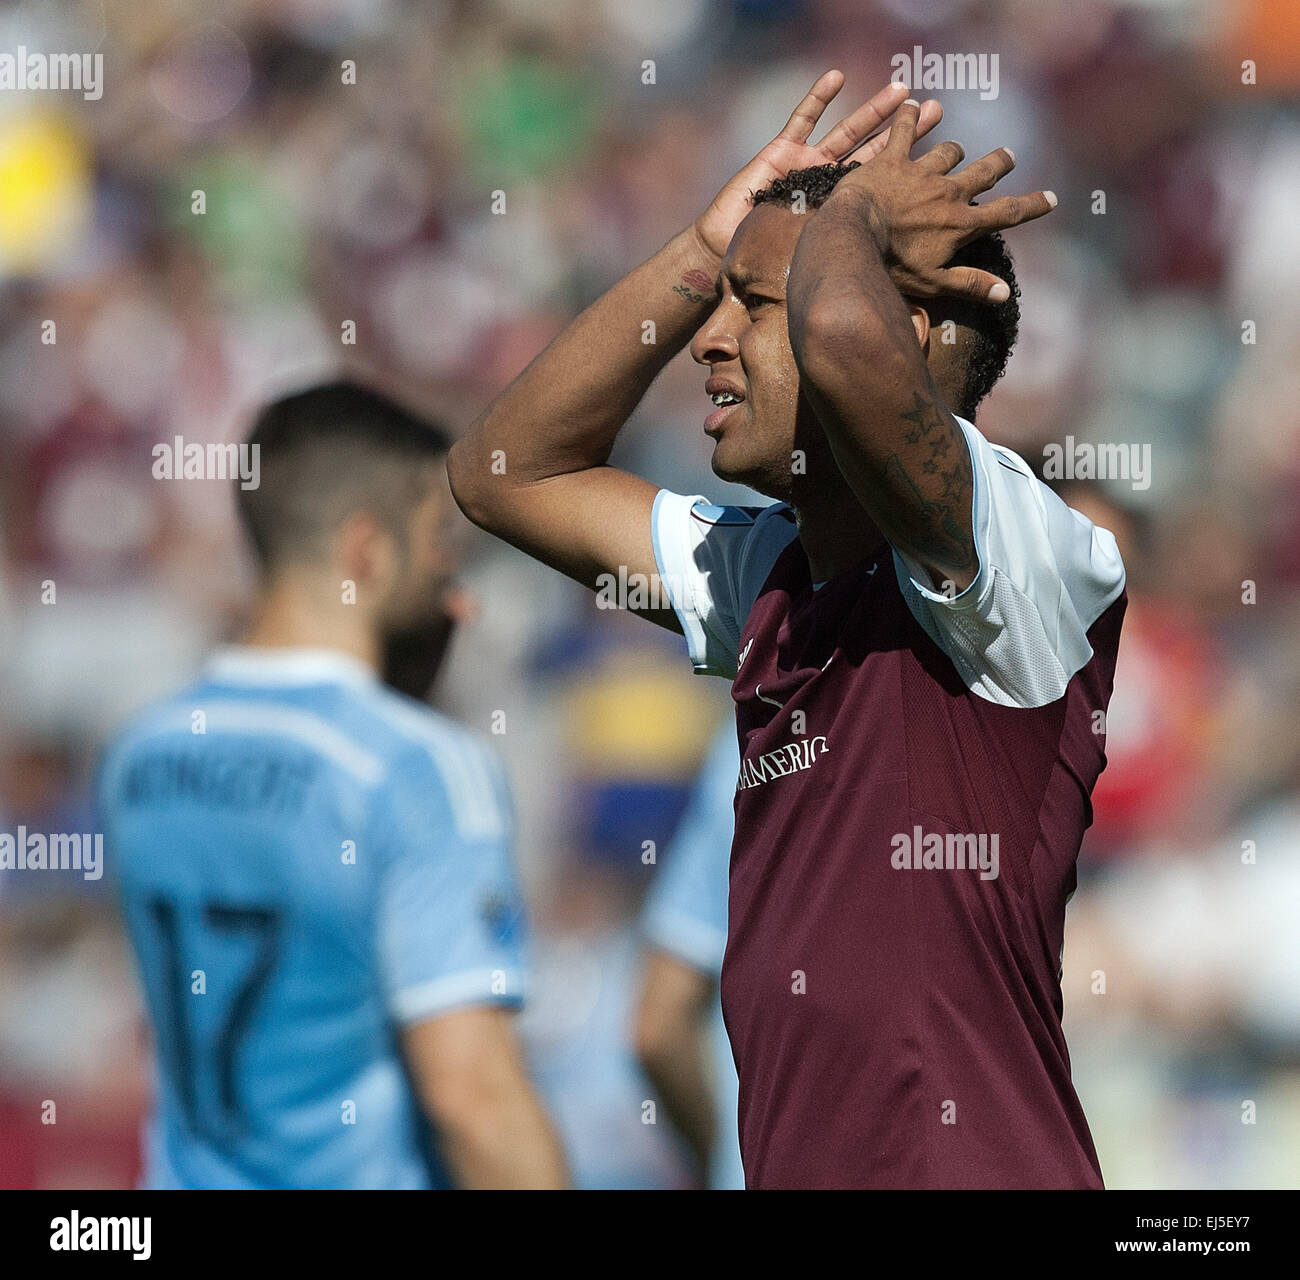 Commerce City, Colorado, USA. 21st Mar, 2015. Rapids F GABRIEL TORRES shows his disappointment after Referee does not call a Penalty Kick during the 2nd. Half at Dicks Sporting Goods Park during the Rapids Home Opener Saturday afternoon. Rapids & New York City FC draw to 0-0. © Hector Acevedo/ZUMA Wire/Alamy Live News Stock Photo